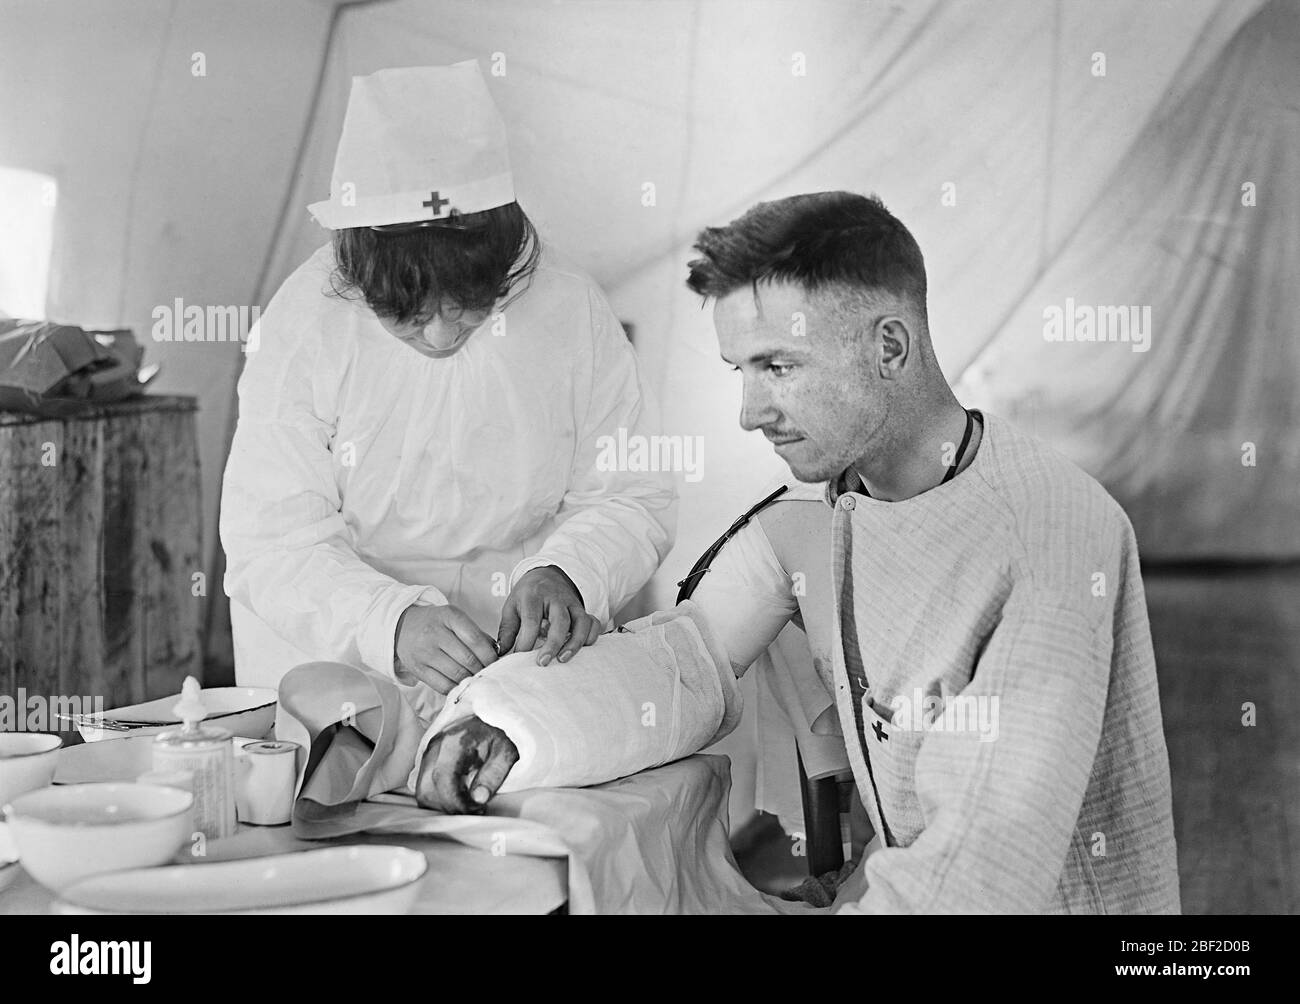 American Red Cross Nurse bandaging arm of Wounded American Soldier, American Military Hospital No. 5, a complete portable Tent Hospital supported by American Red Cross, Auteuil, France, Lewis Wickes Hine, American National Red Cross Photograph Collection, June 1918 Stock Photo